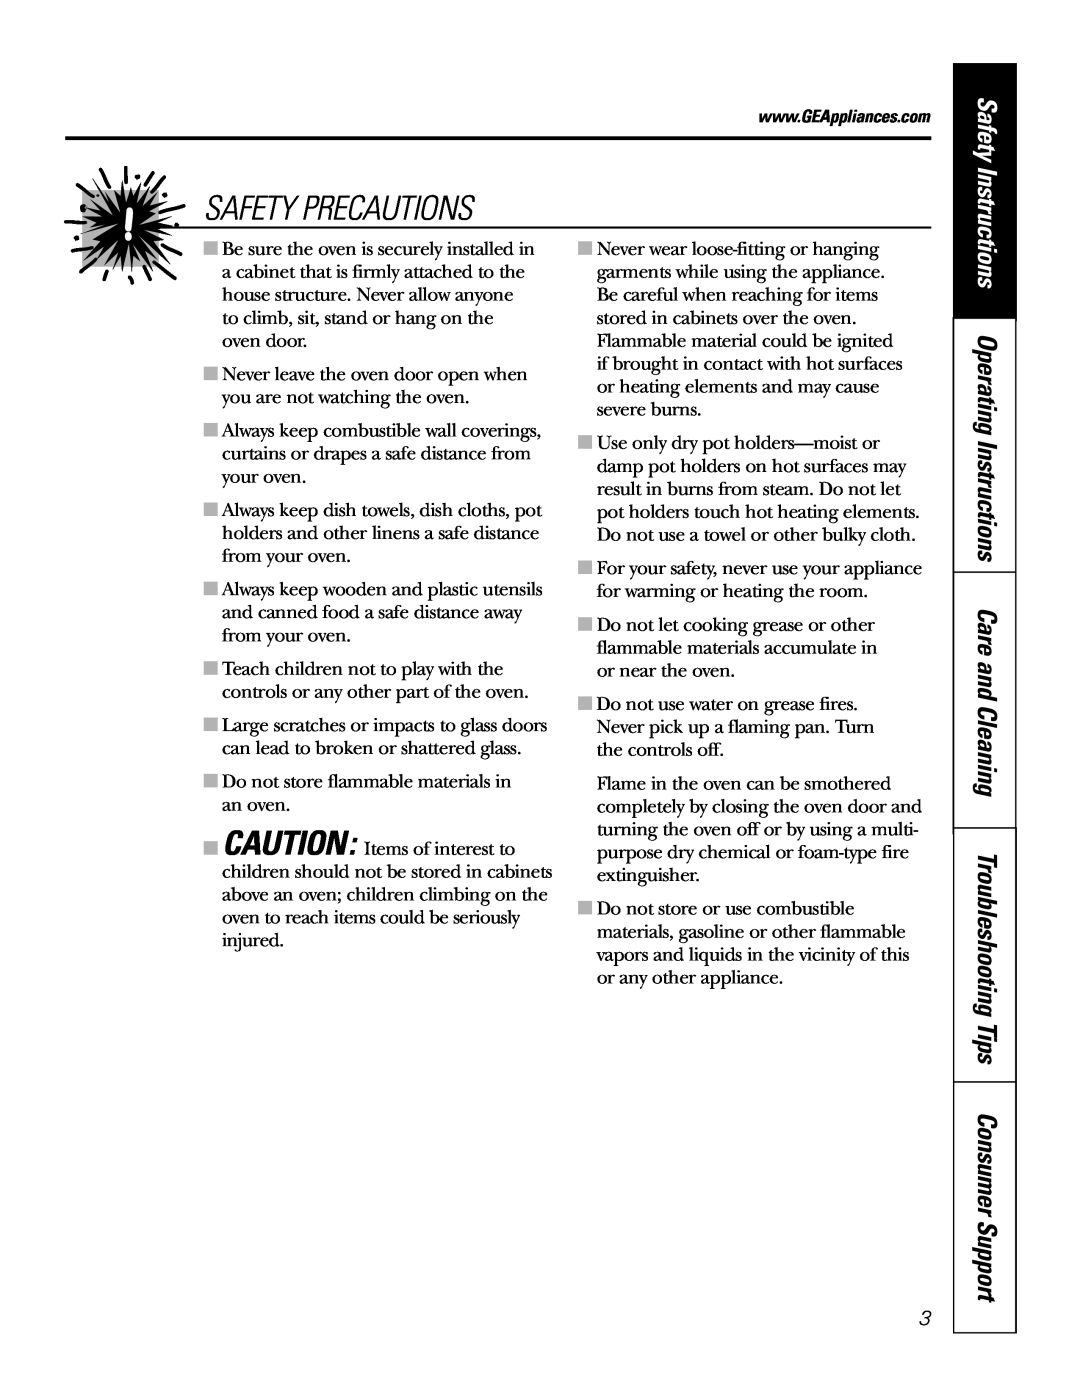 GE JRS0624 owner manual Safety Precautions, Do not store flammable materials in an oven 